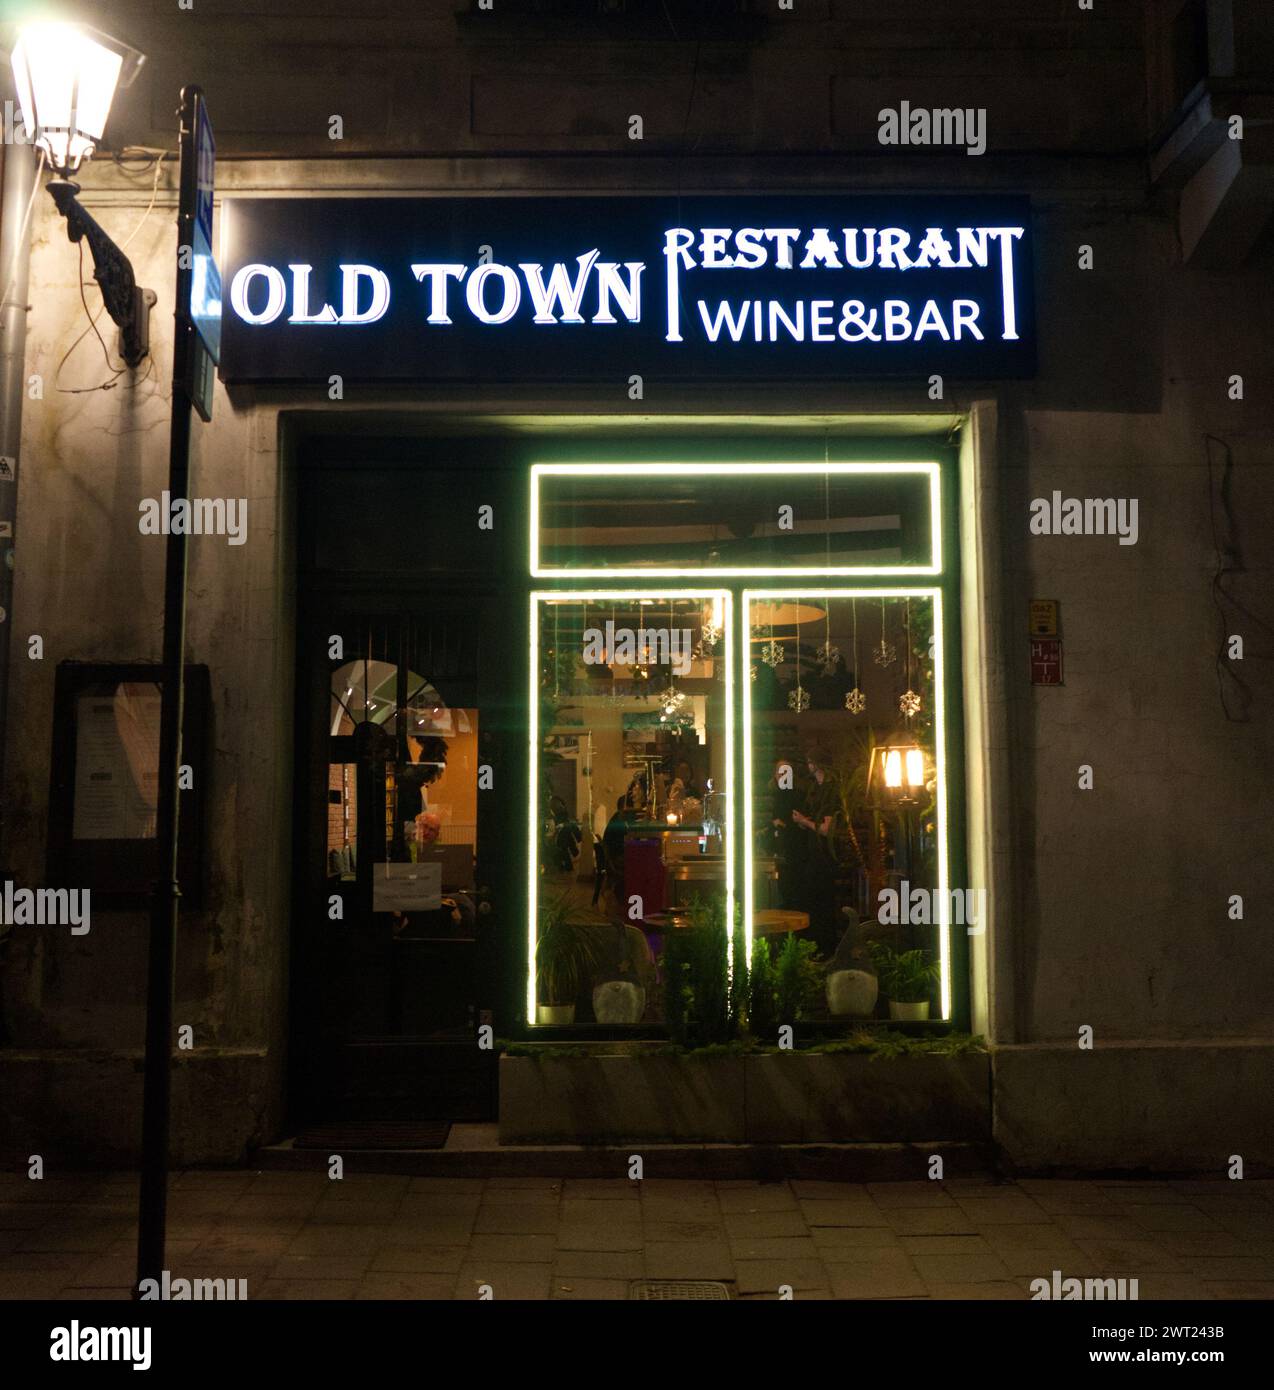 Old Town Wine Bar and Restaurant, Cracovia, Polonia. Foto Stock